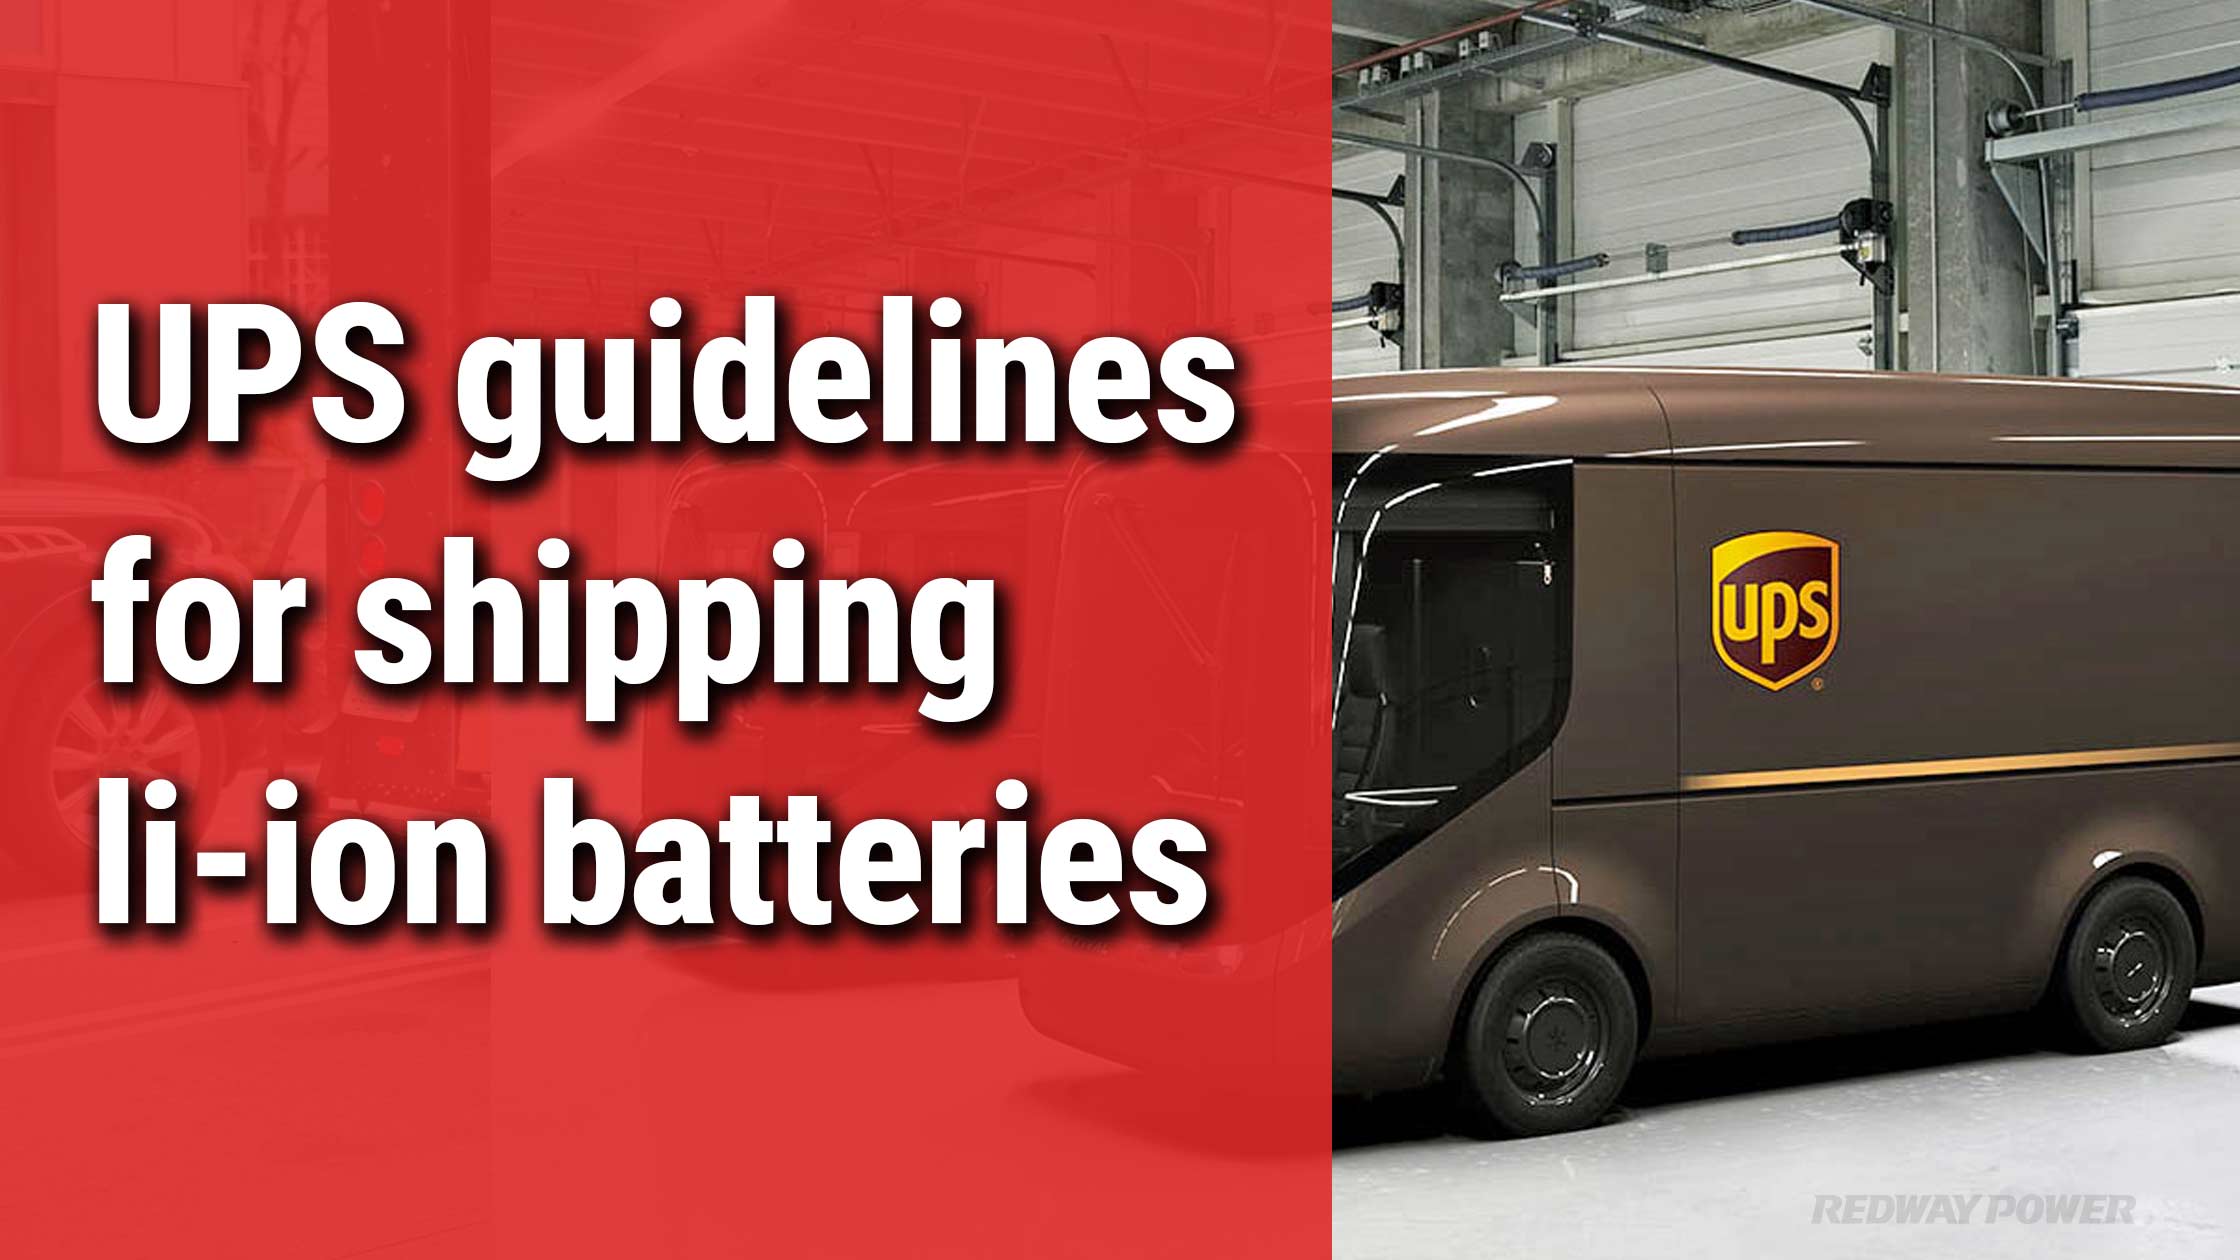 UPS guidelines for shipping lithium batteries. Can I Send Lithium Batteries Through UPS? redway